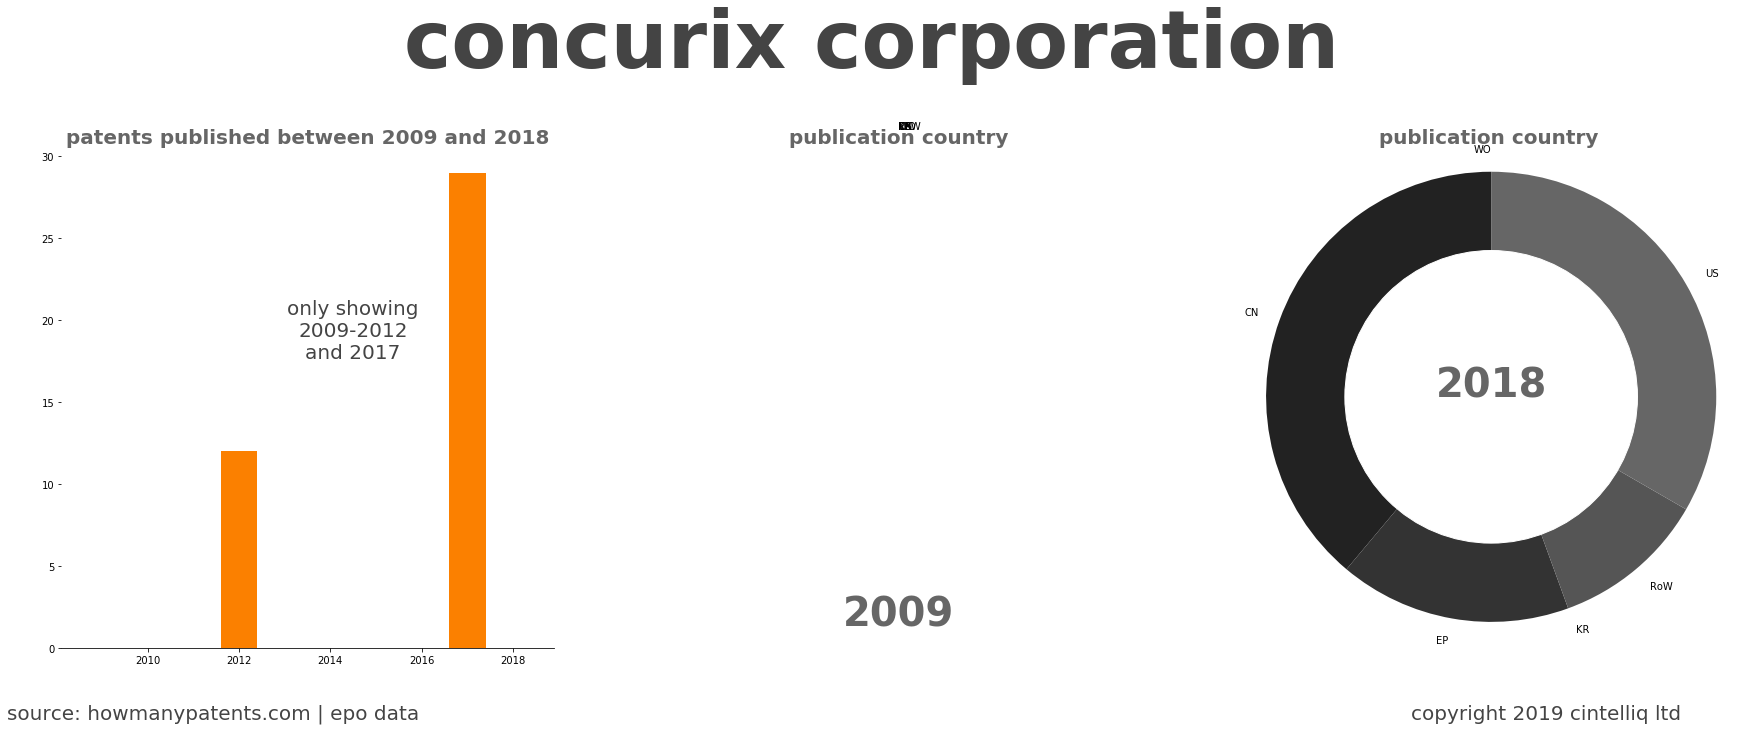 summary of patents for Concurix Corporation